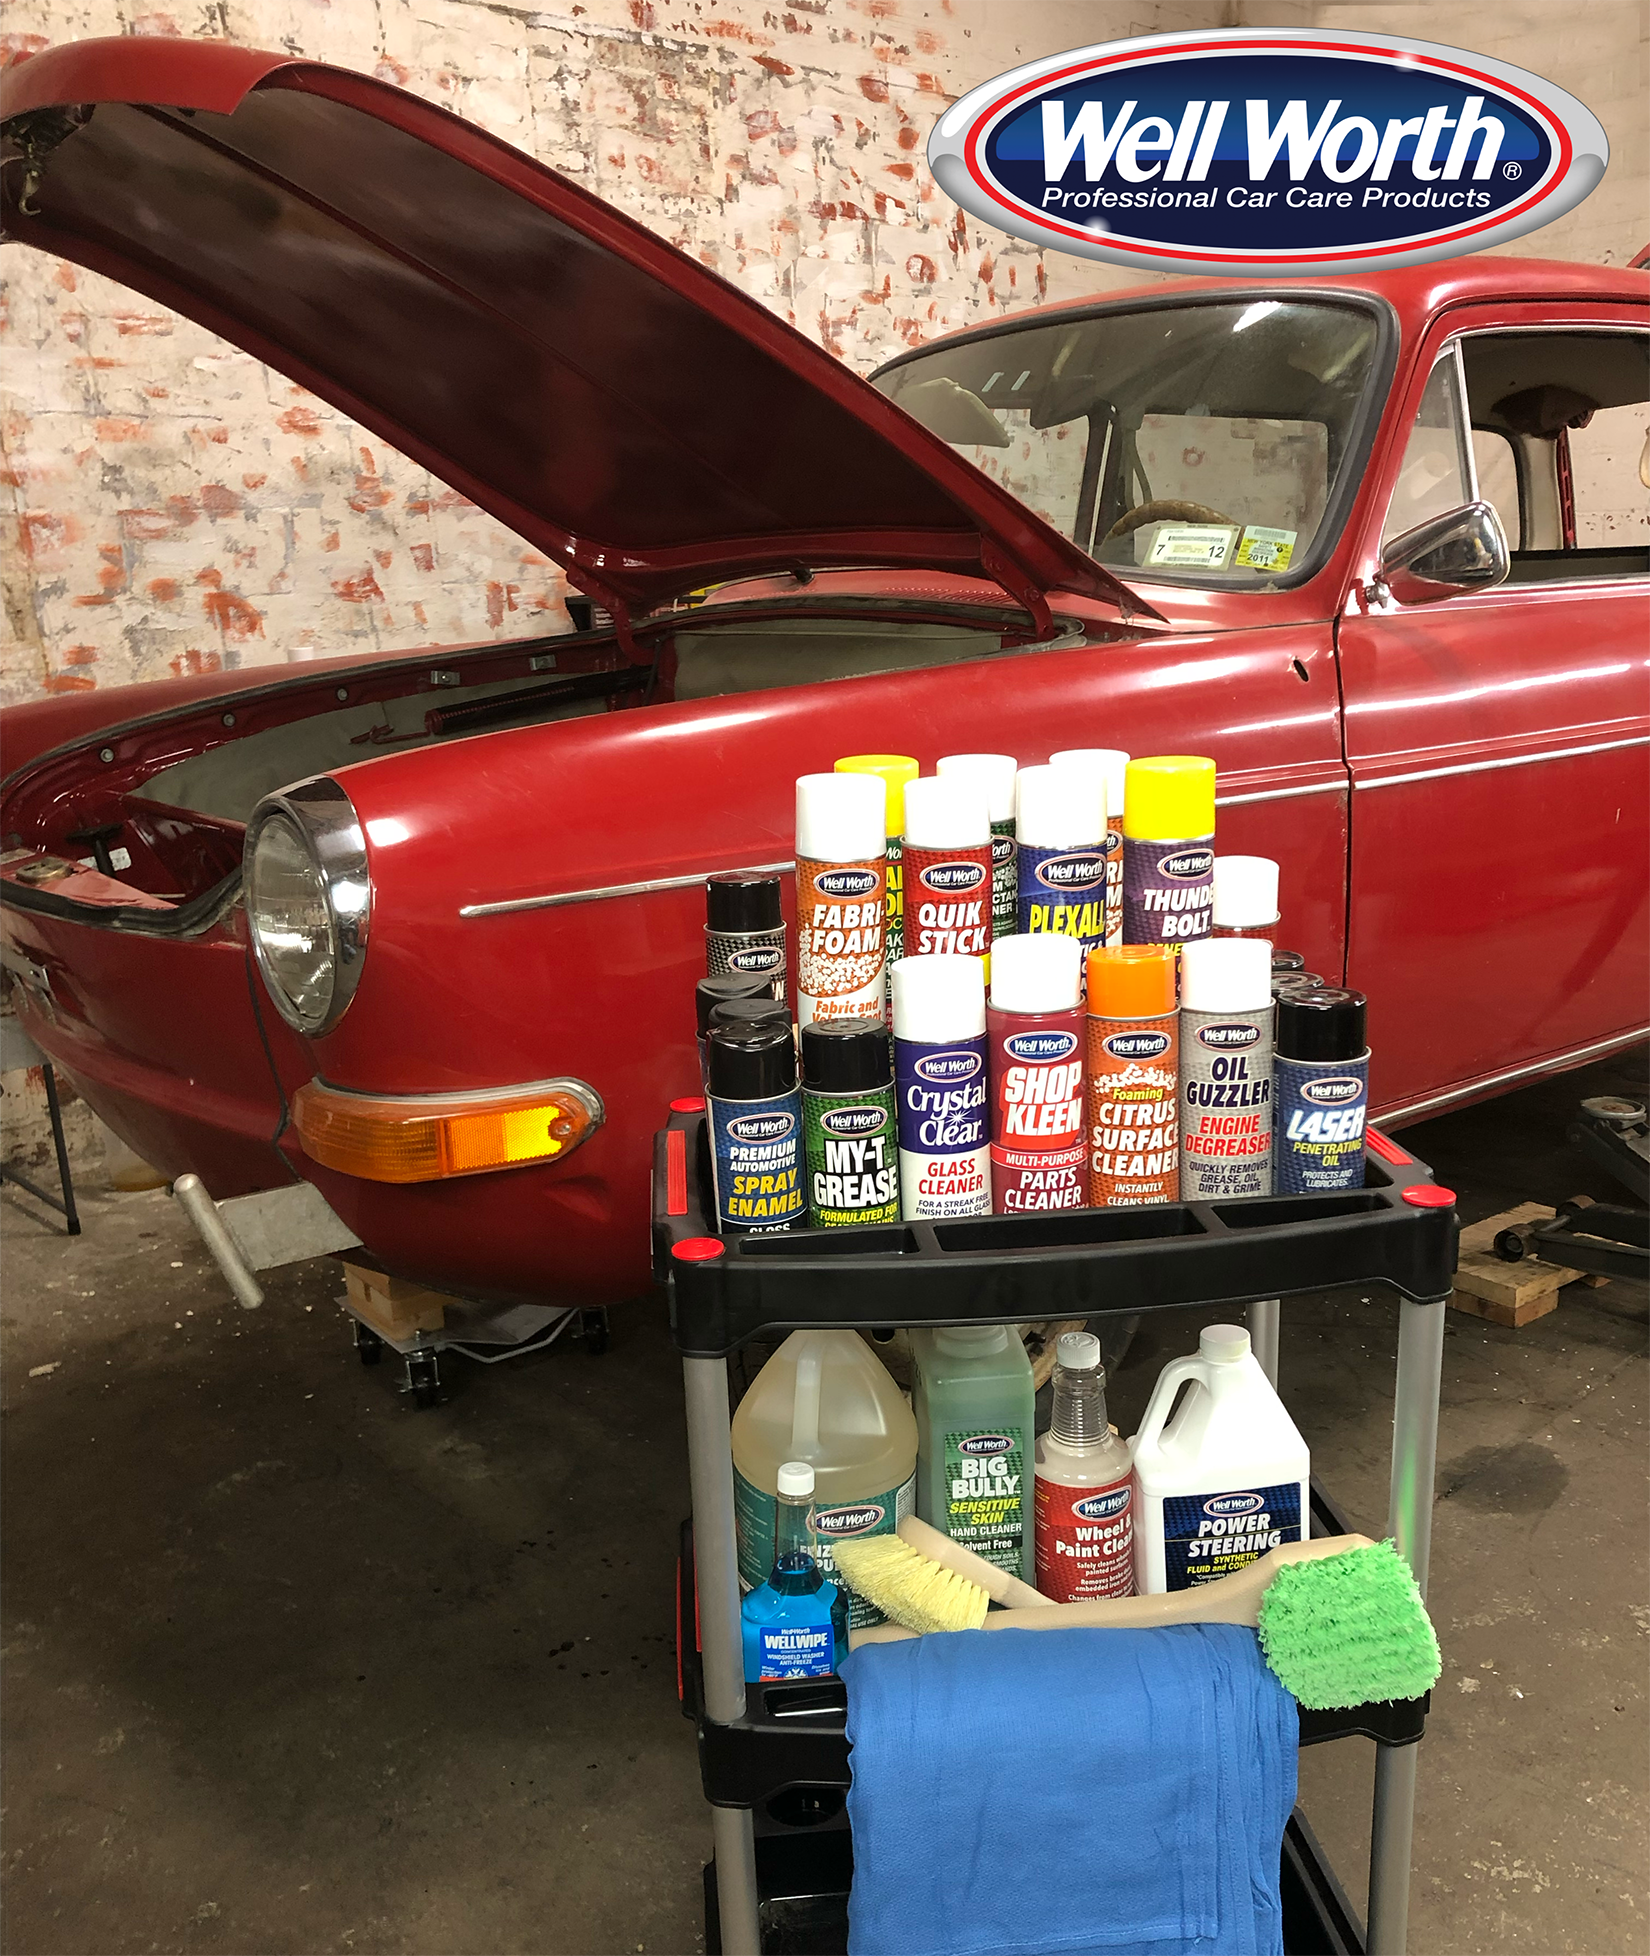 photo of a rolling work cart filled with cleaning, detailing and maintenance products in front of a 1973 VW squareback with its hood open and the logo: Well Worth Professional Car Care Products